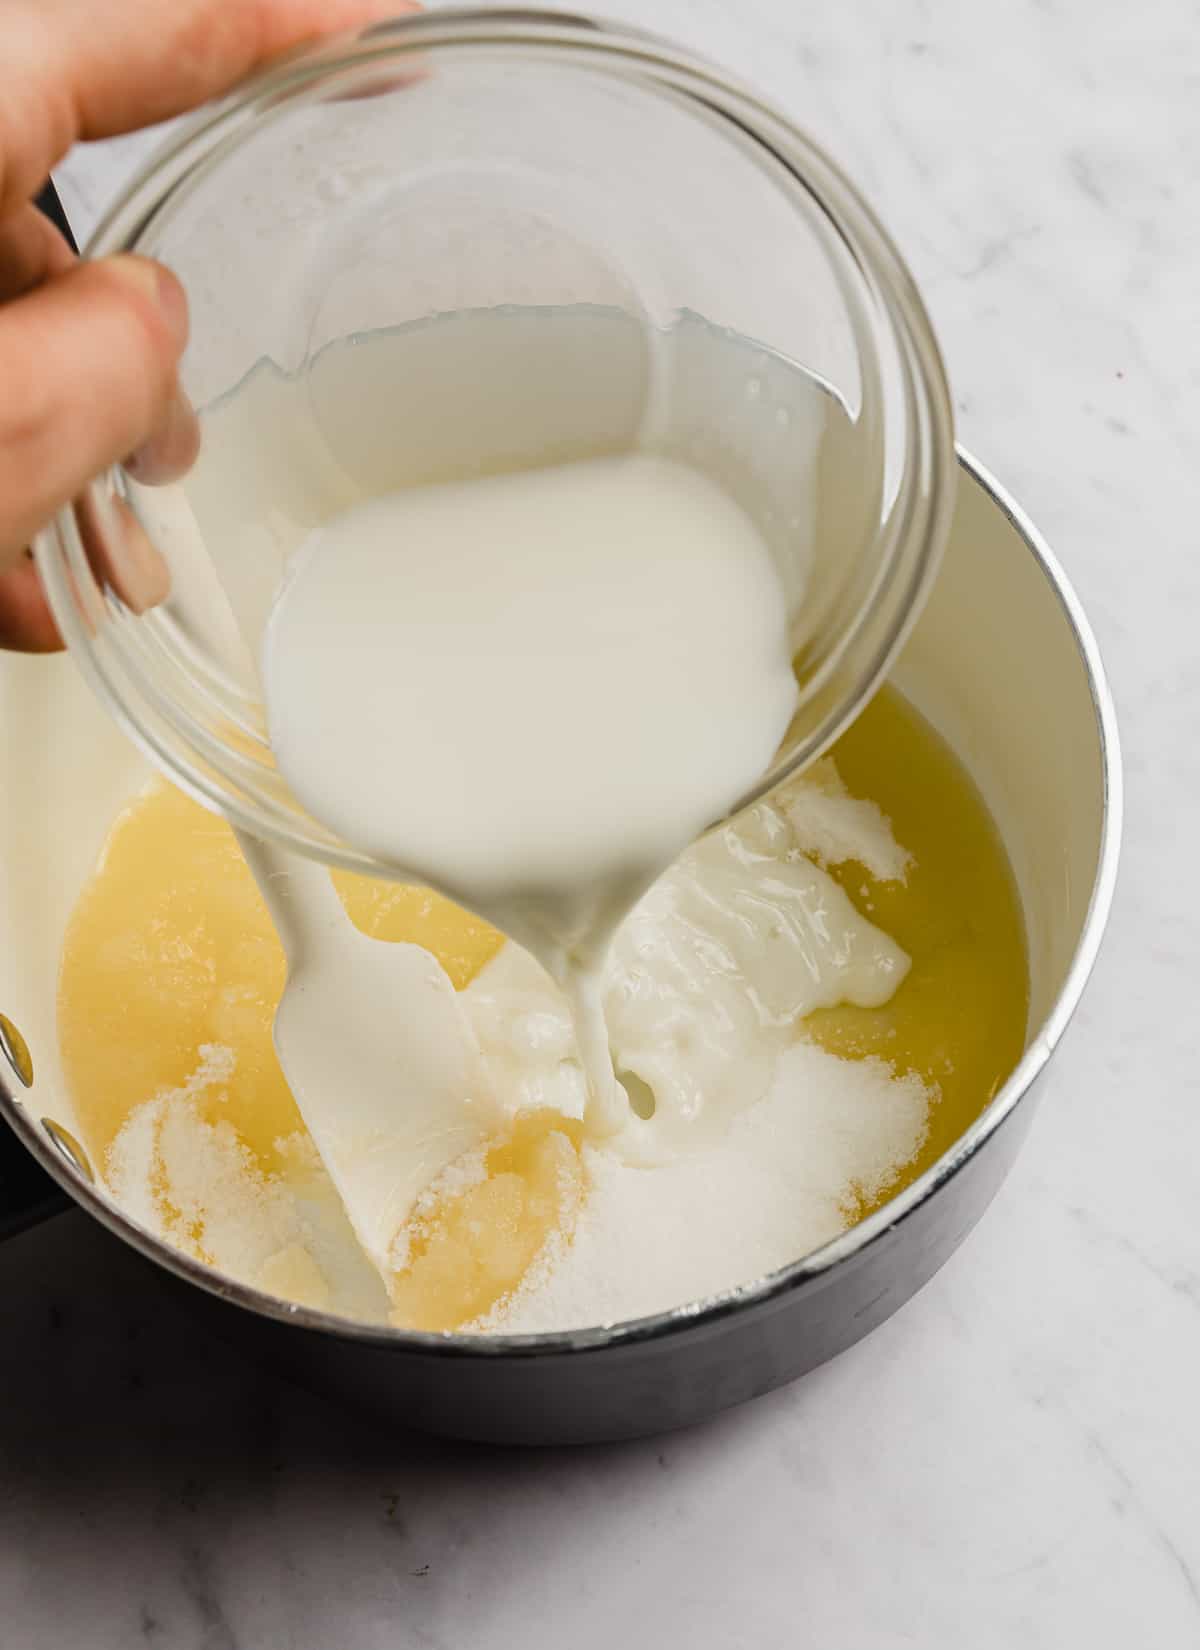 Milk being poured into a white pot that has melted butter and sugar in it.